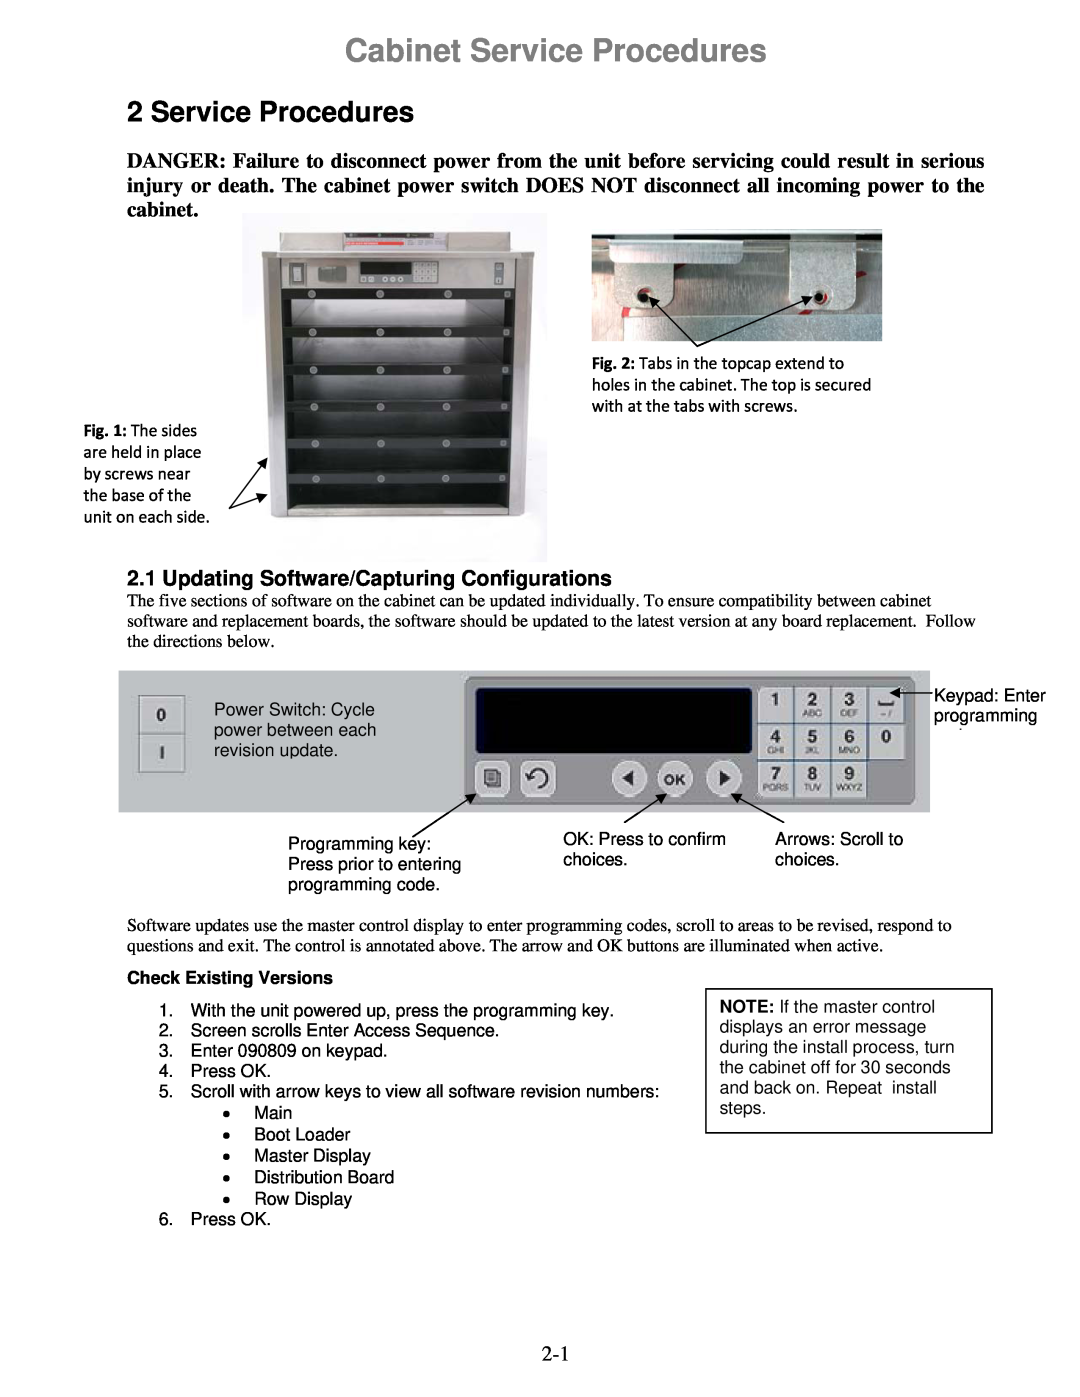 Frymaster UHC-HD manual Cabinet Service Procedures, Updating Software/Capturing Configurations, Check Existing Versions 